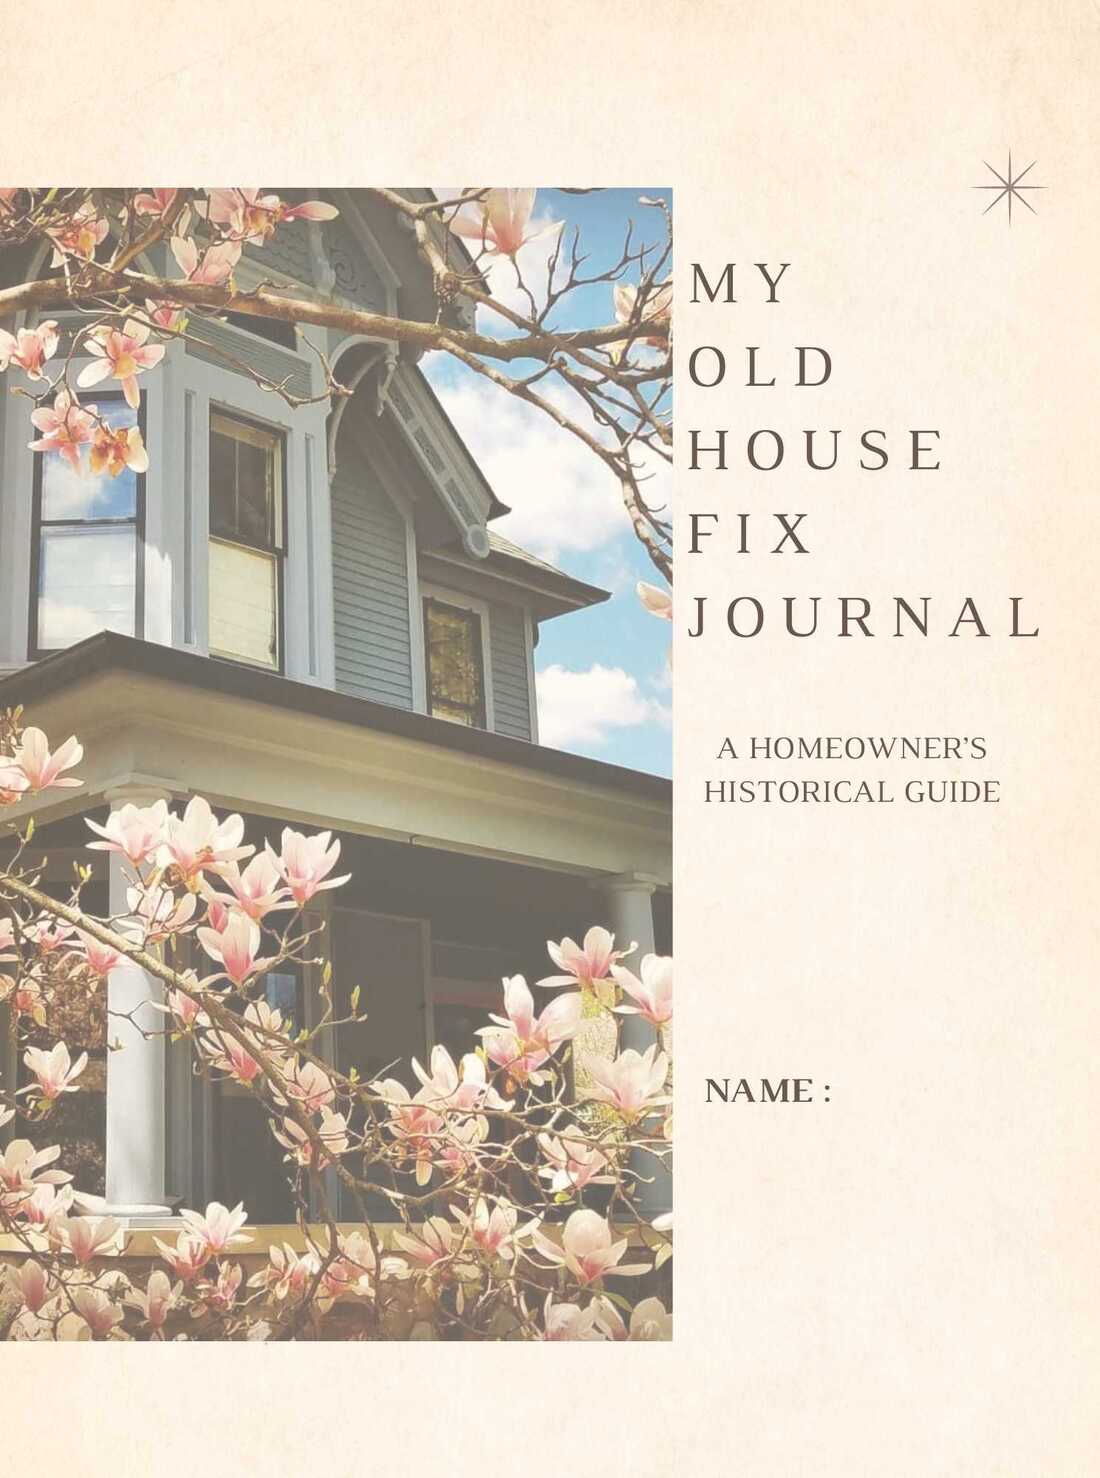 my old house fix journal - a homeowner's historical guide